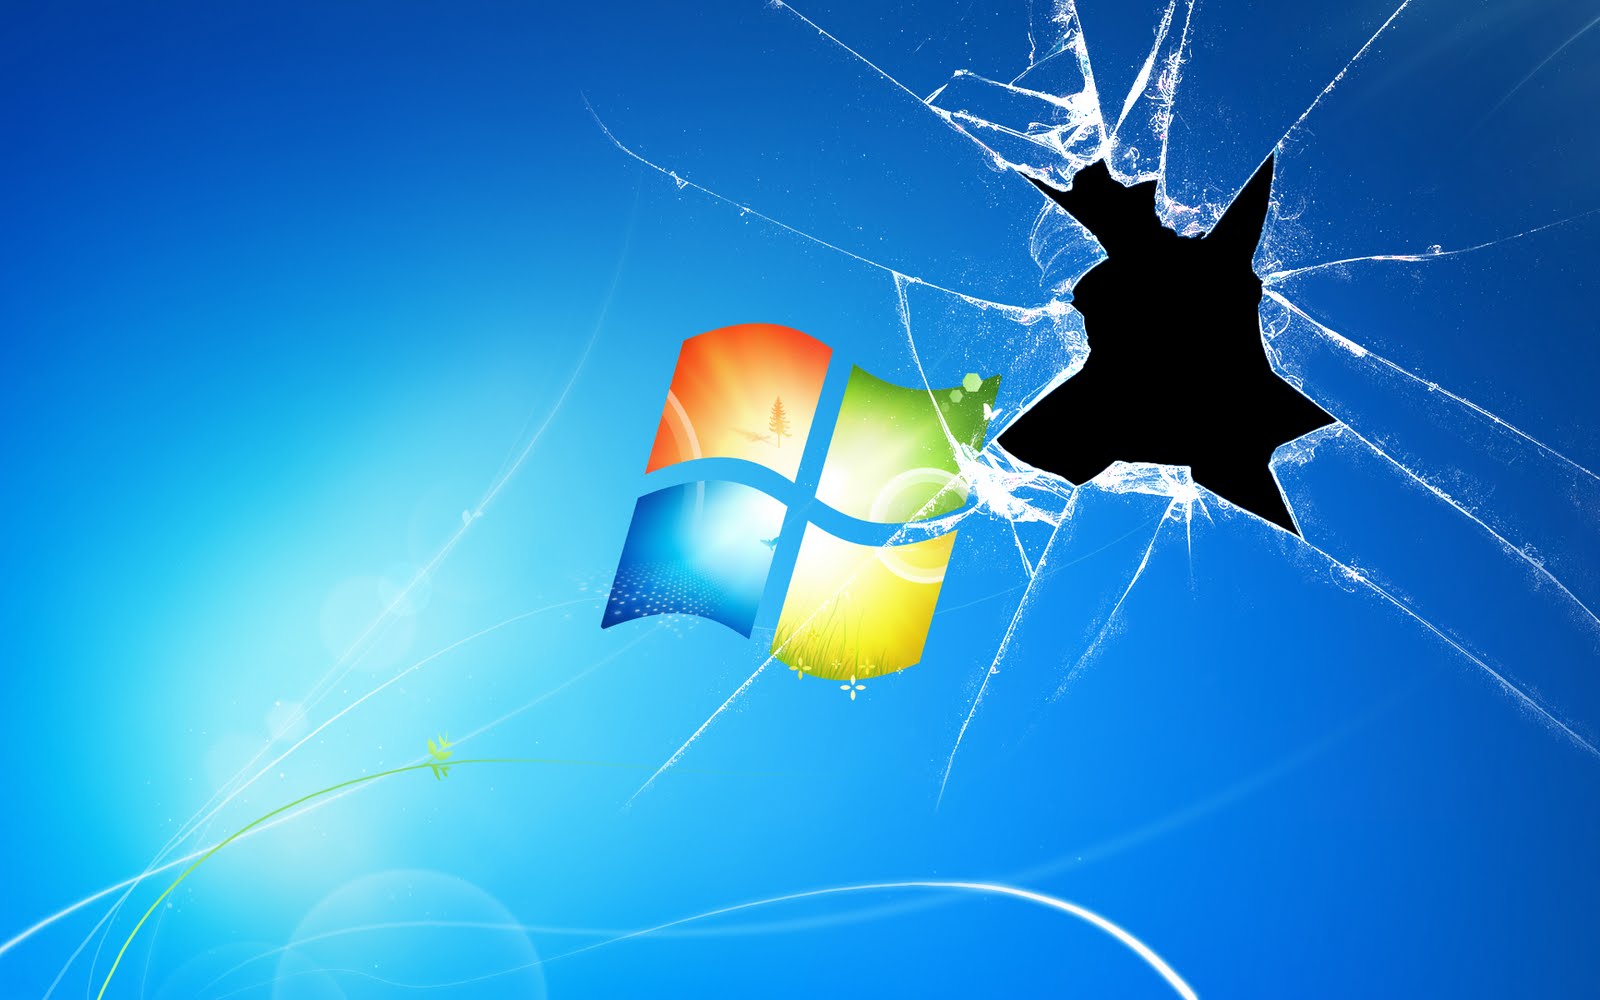 Broken Windows 7 hd wallpaper 1920x1200 100 out of 10 based on 1 1600x1000